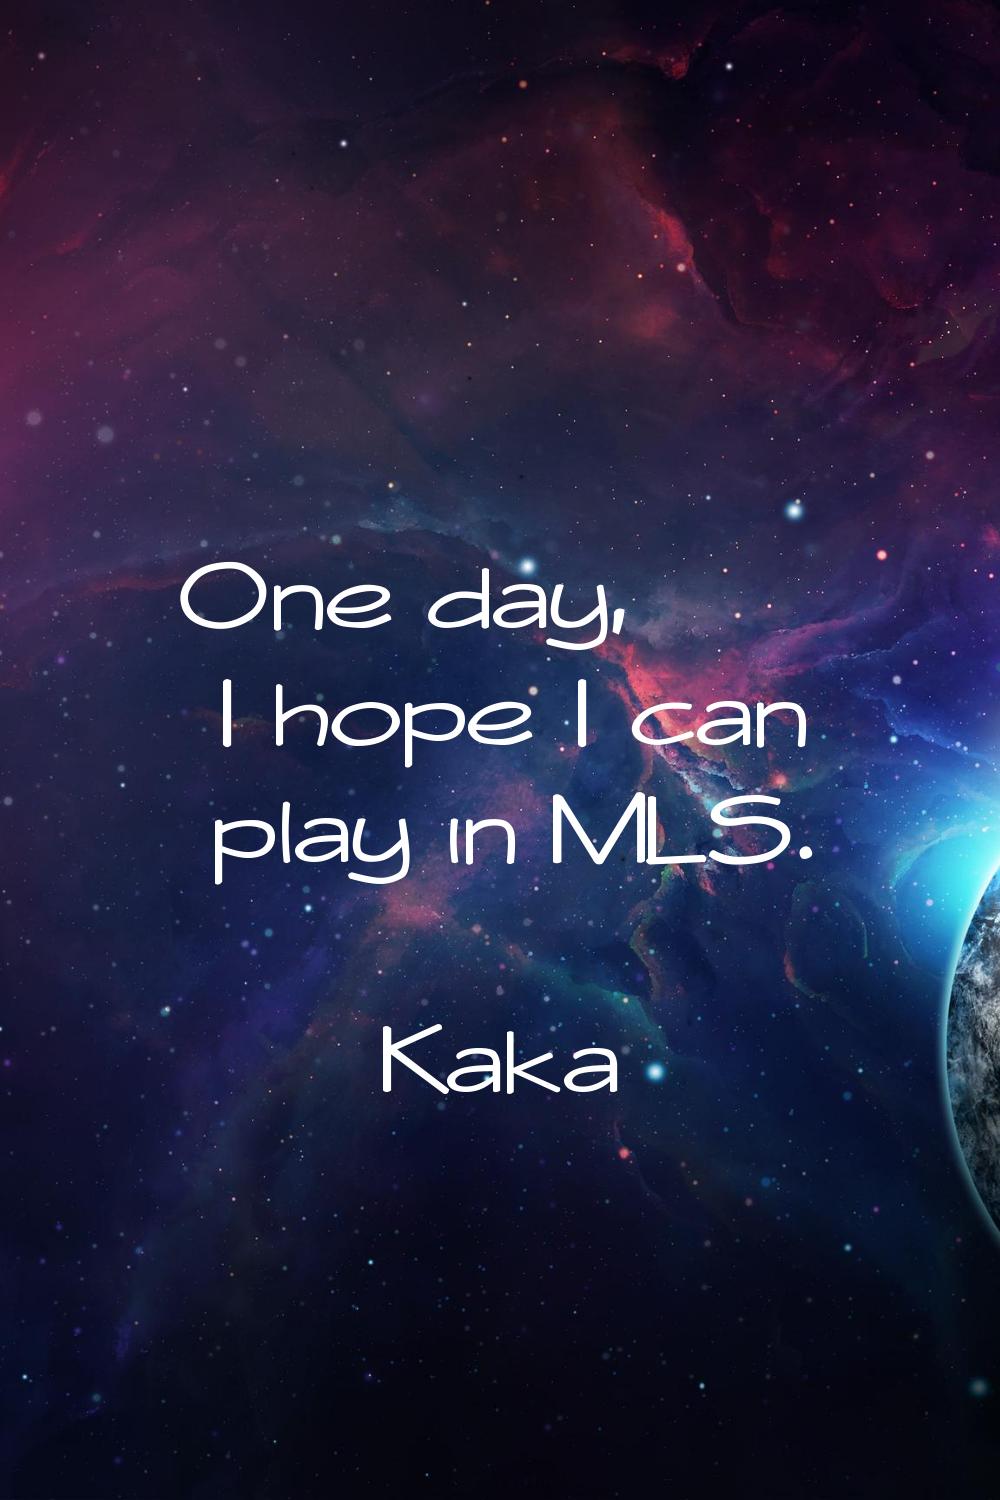 One day, I hope I can play in MLS.